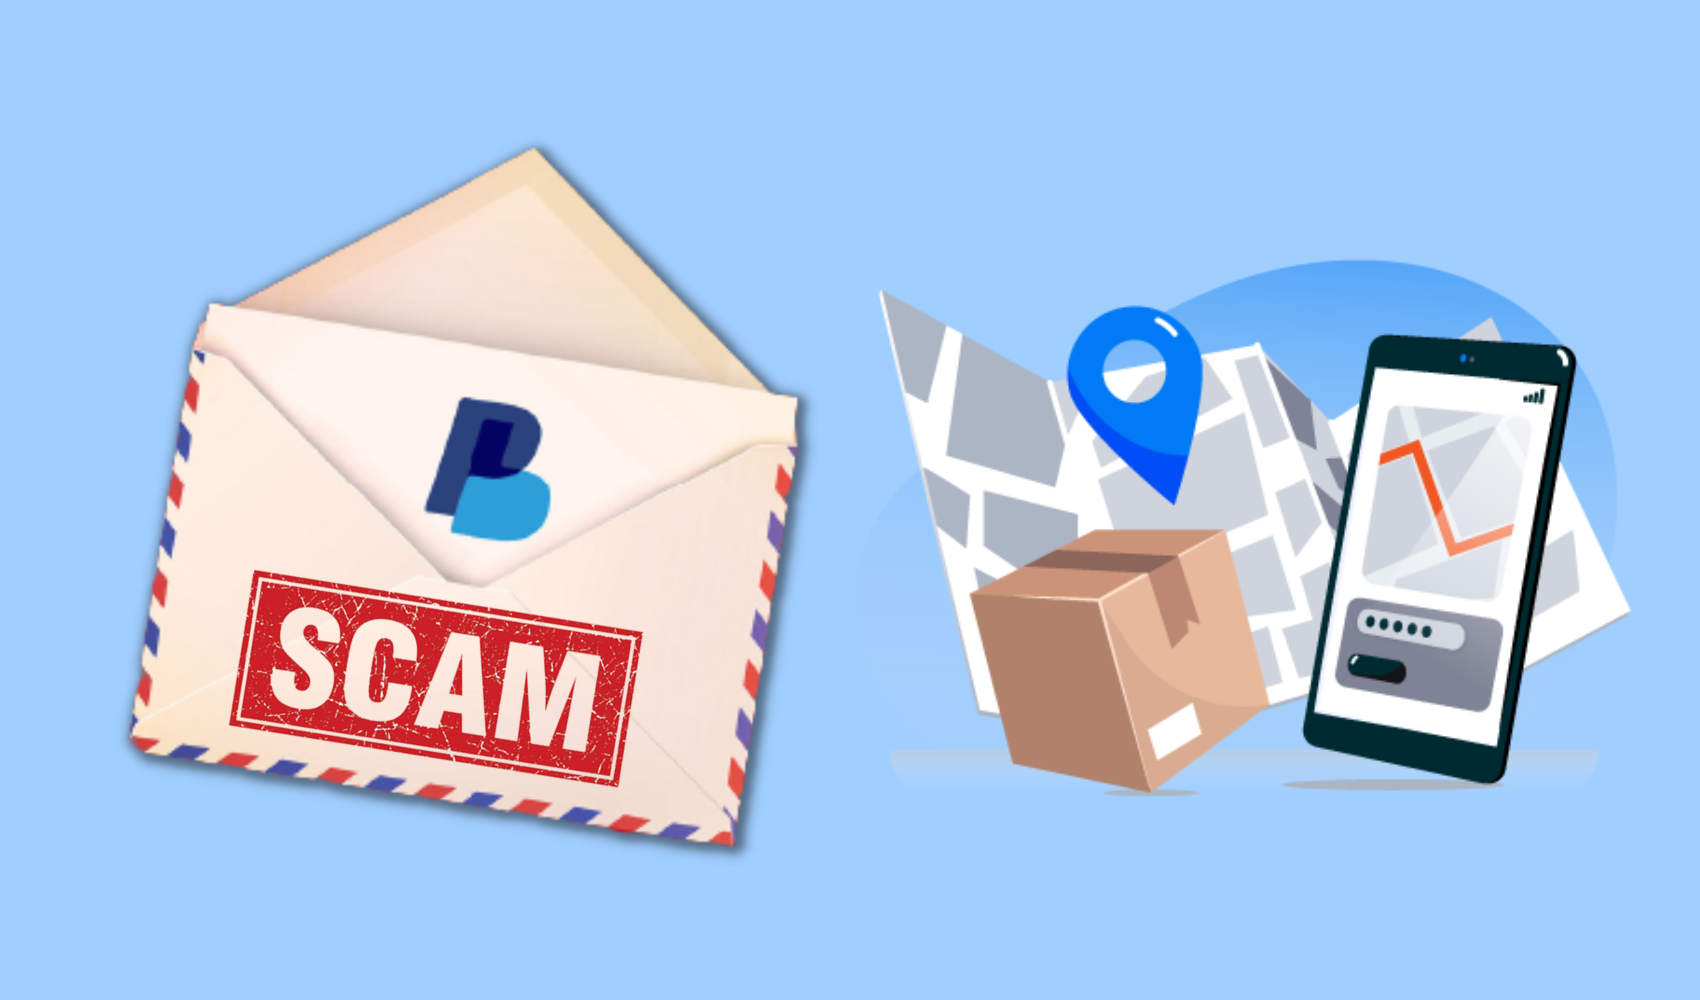 Delivery-related scams involving PayPal emails are the most popular